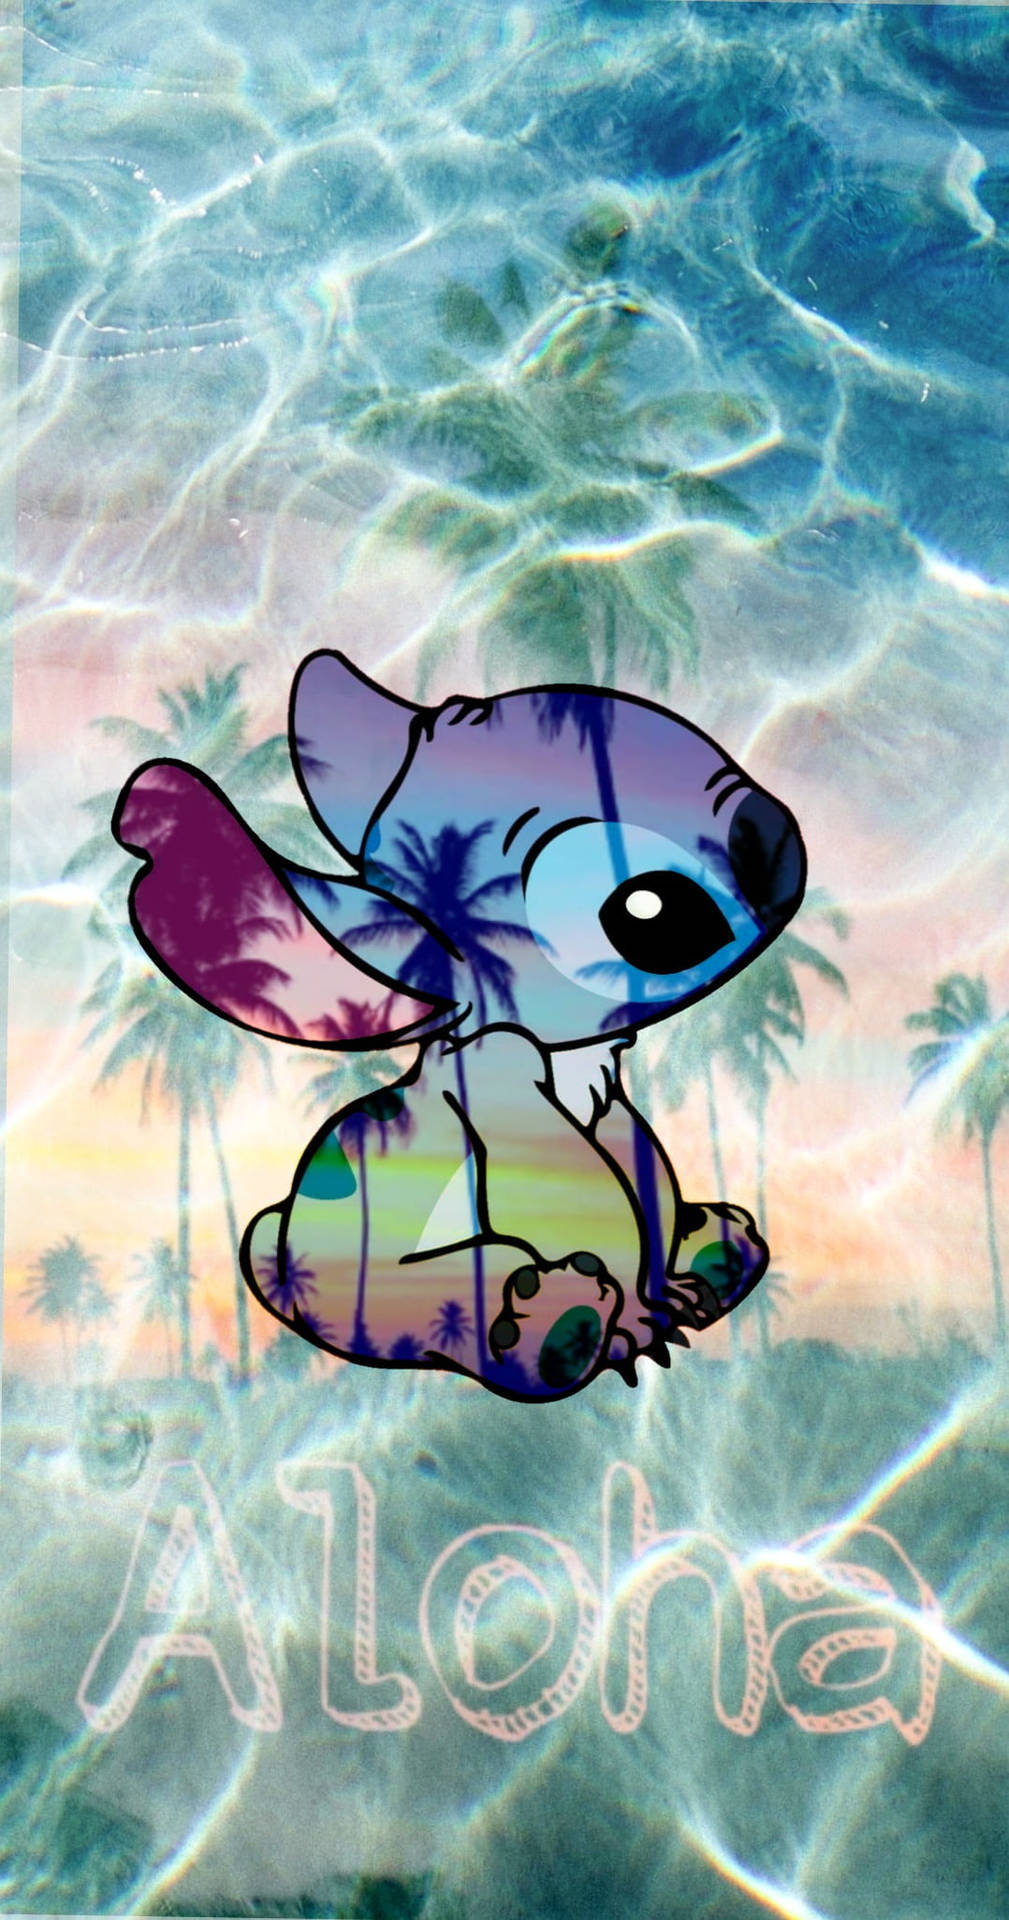 [100+] Cute Disney Stitch Wallpapers | Wallpapers.com